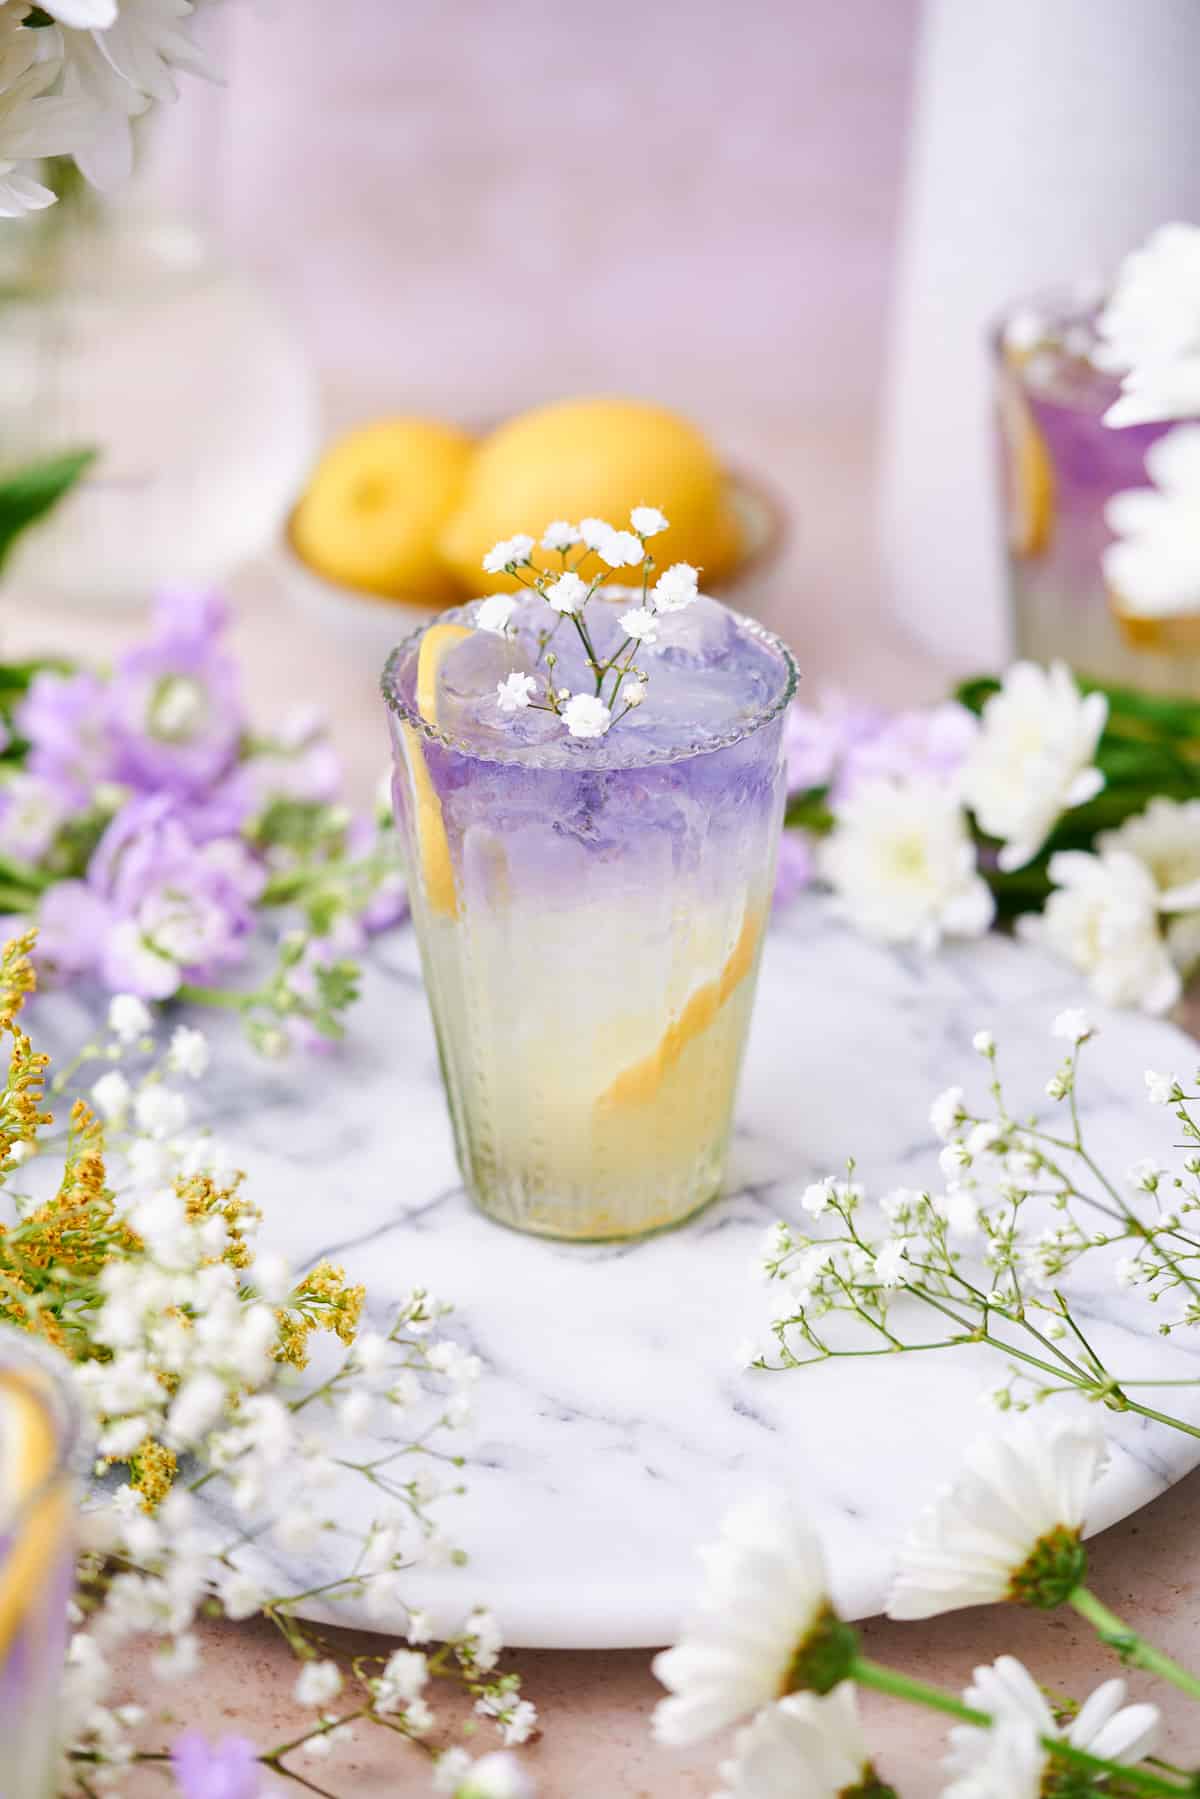 whimsical elderflower collins that is layered with a lemon yellow bottom and a purple empress gin top, topped with baby's breath flowers.